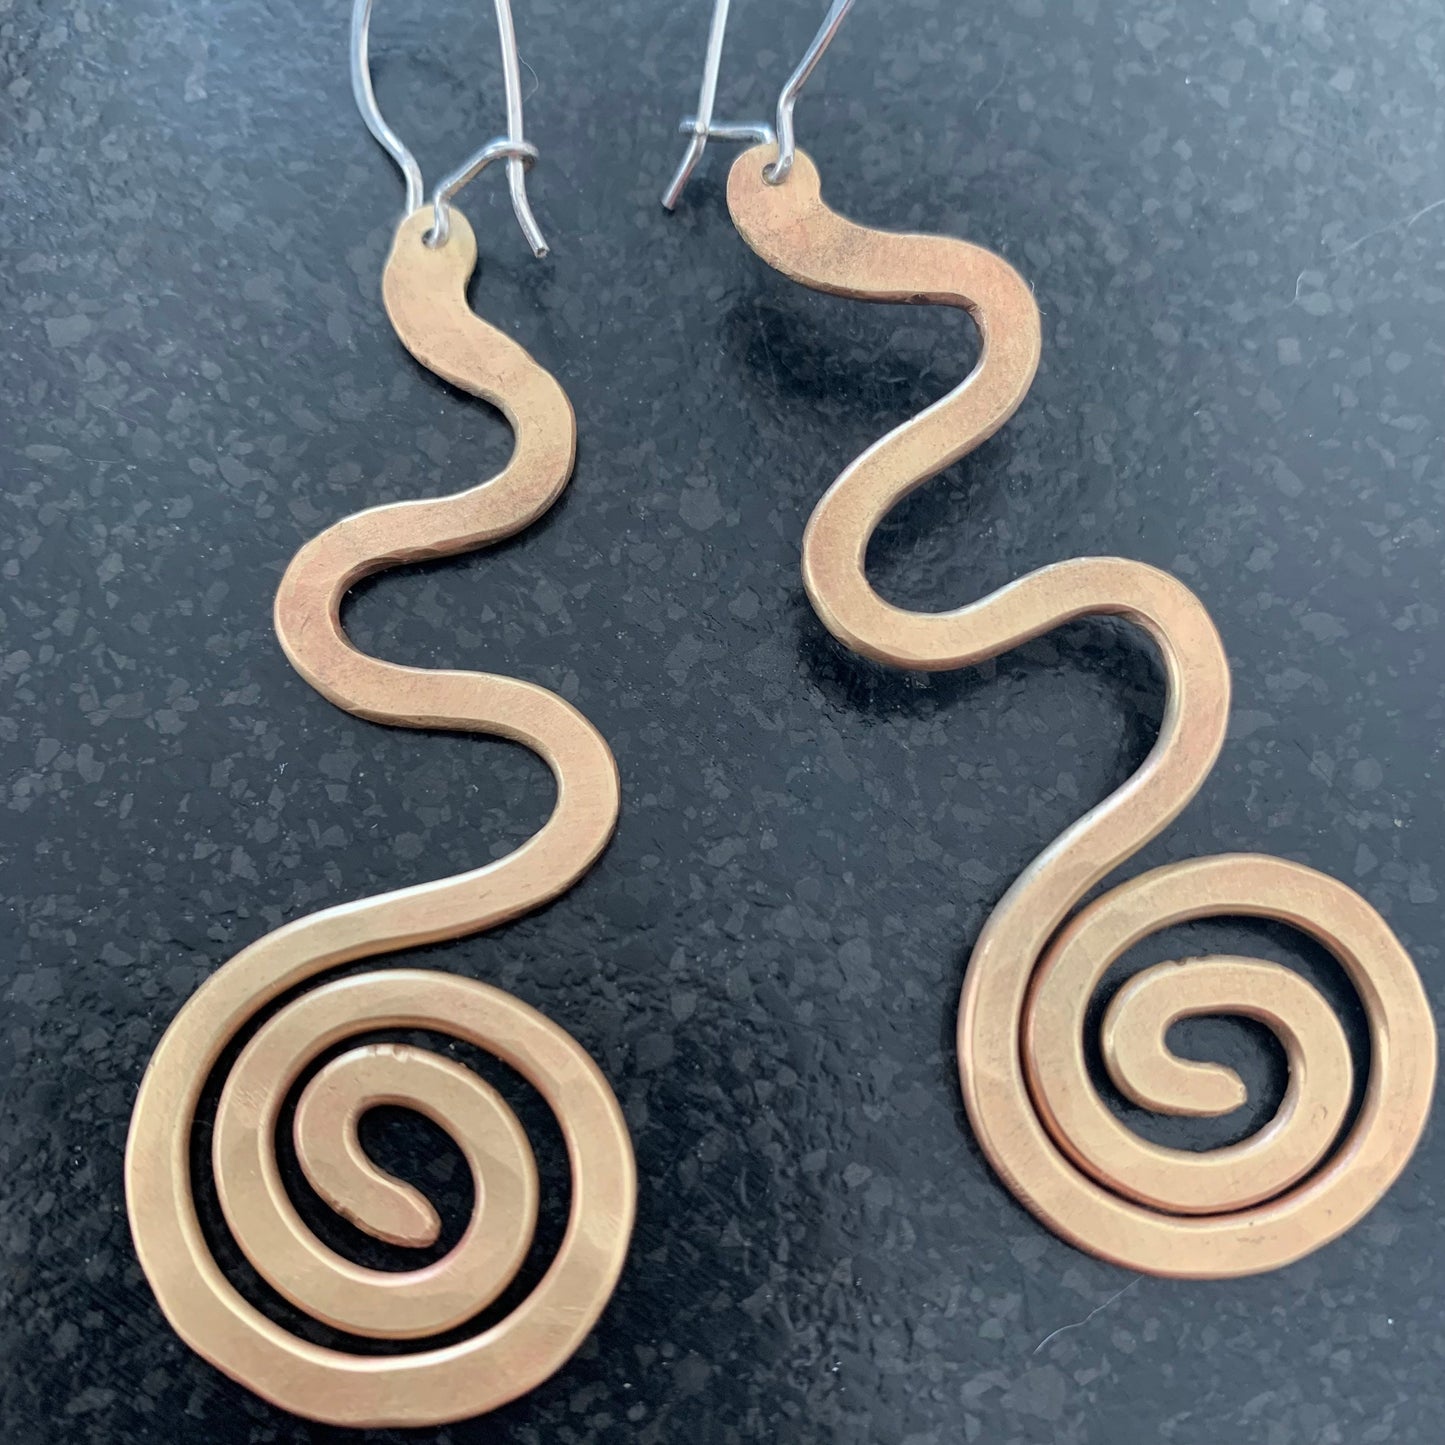 Spiral design - statement earrings - forged brass earrings - boho jewelry - one of a kind - street style - rustic tribal inspired - gifts